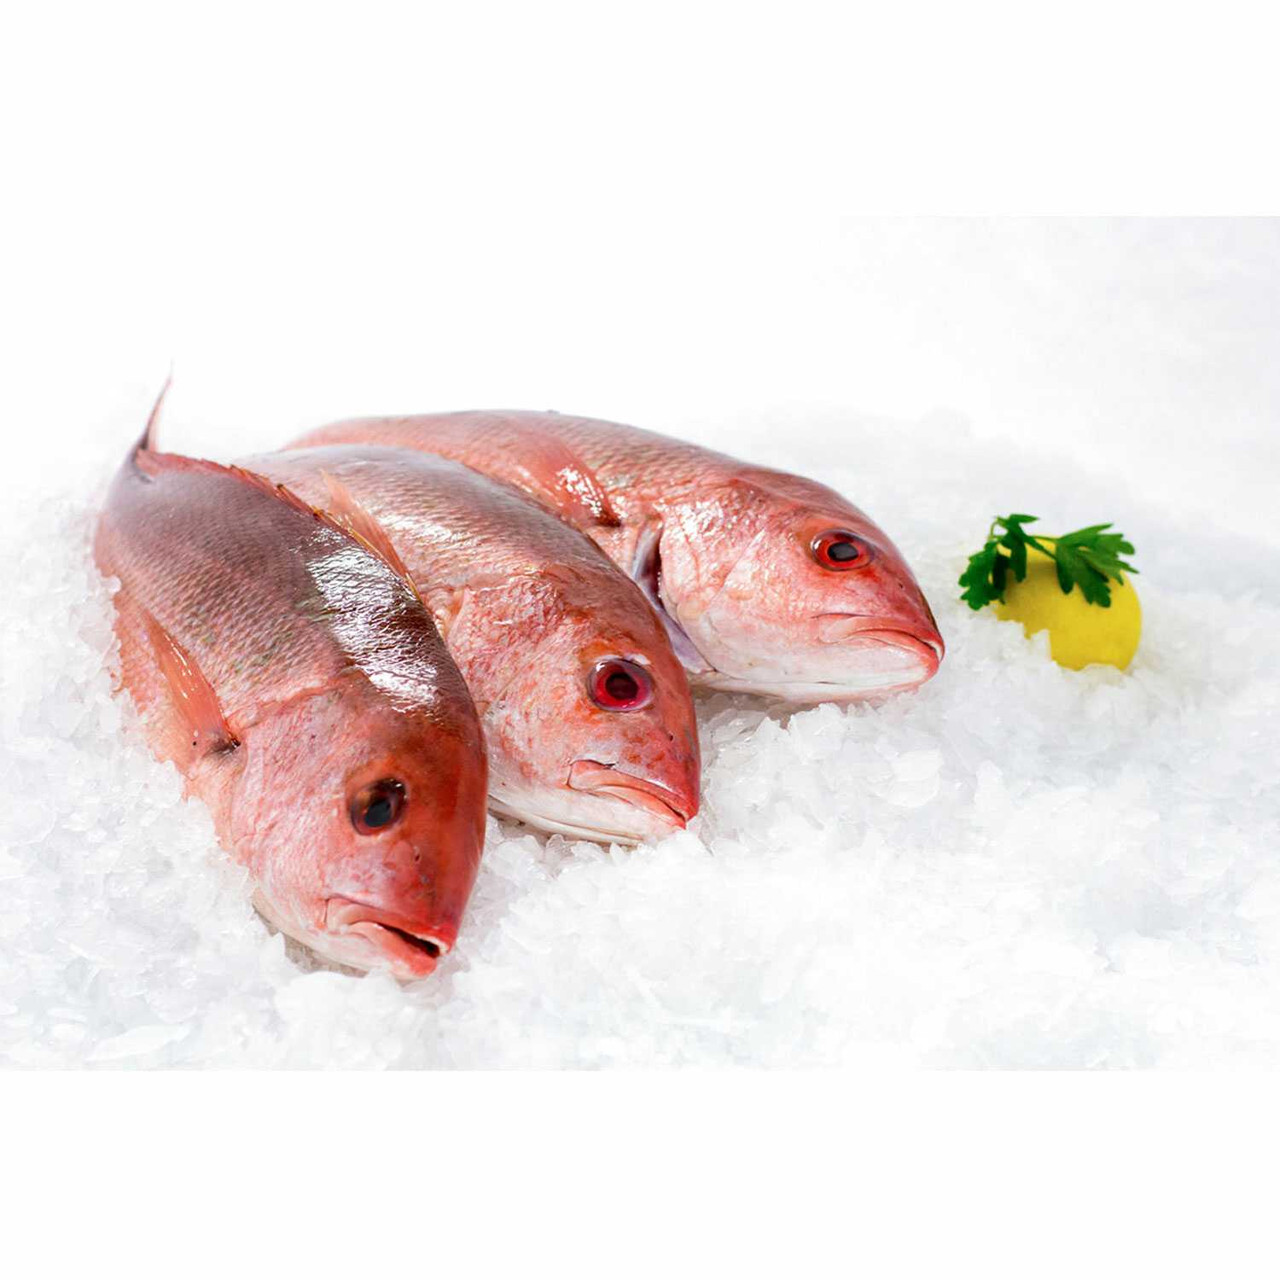 Whole Caribbean Red Snapper 2.5 - 3 Lb. Avg(1-3 Fish)